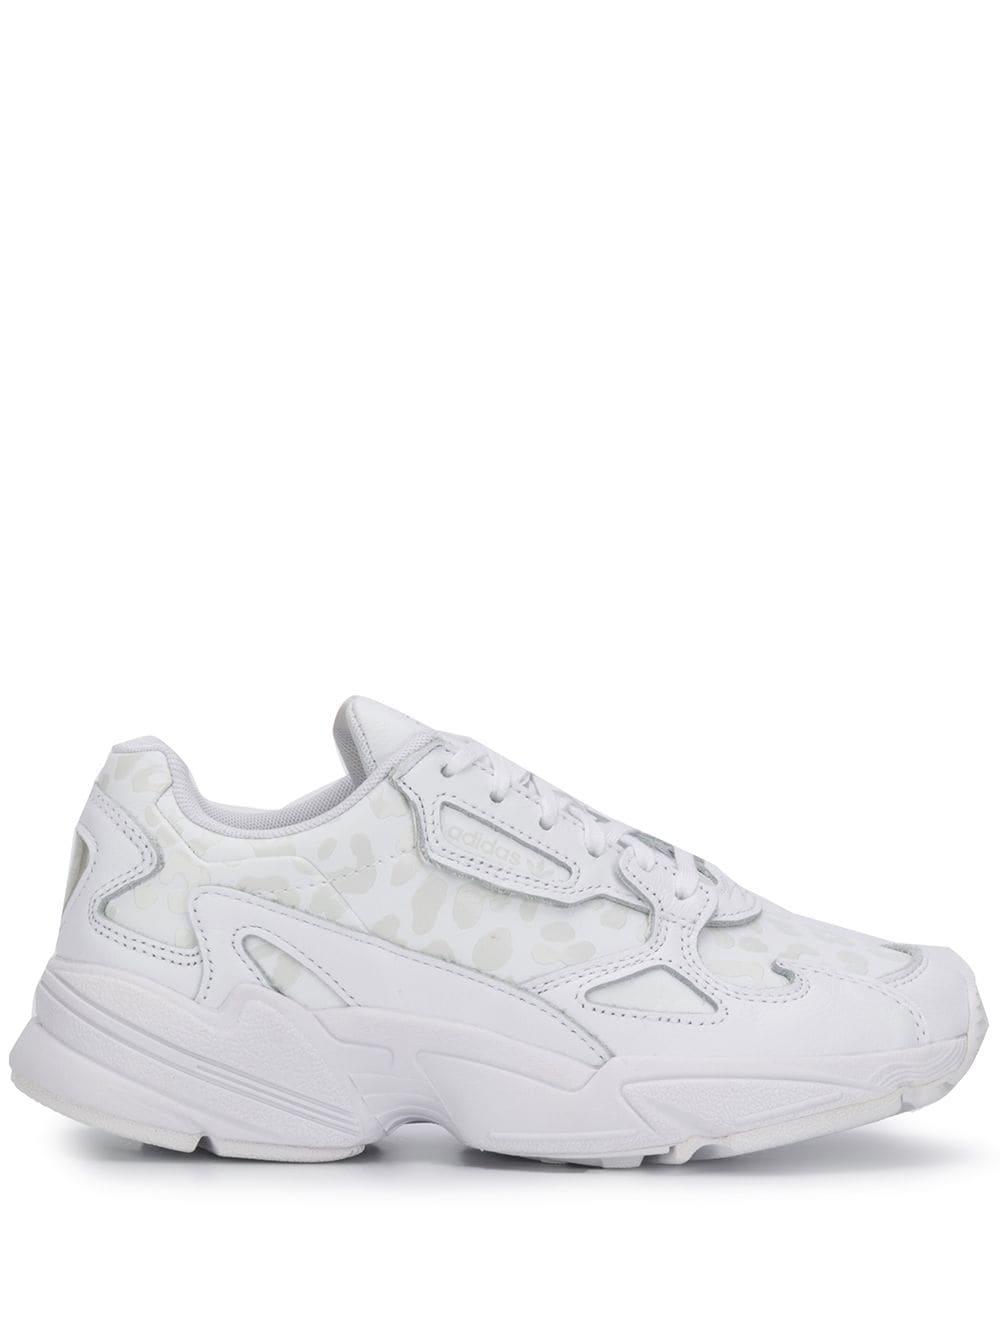 adidas Falcon Leopard Print Sneakers in White | Lyst UK